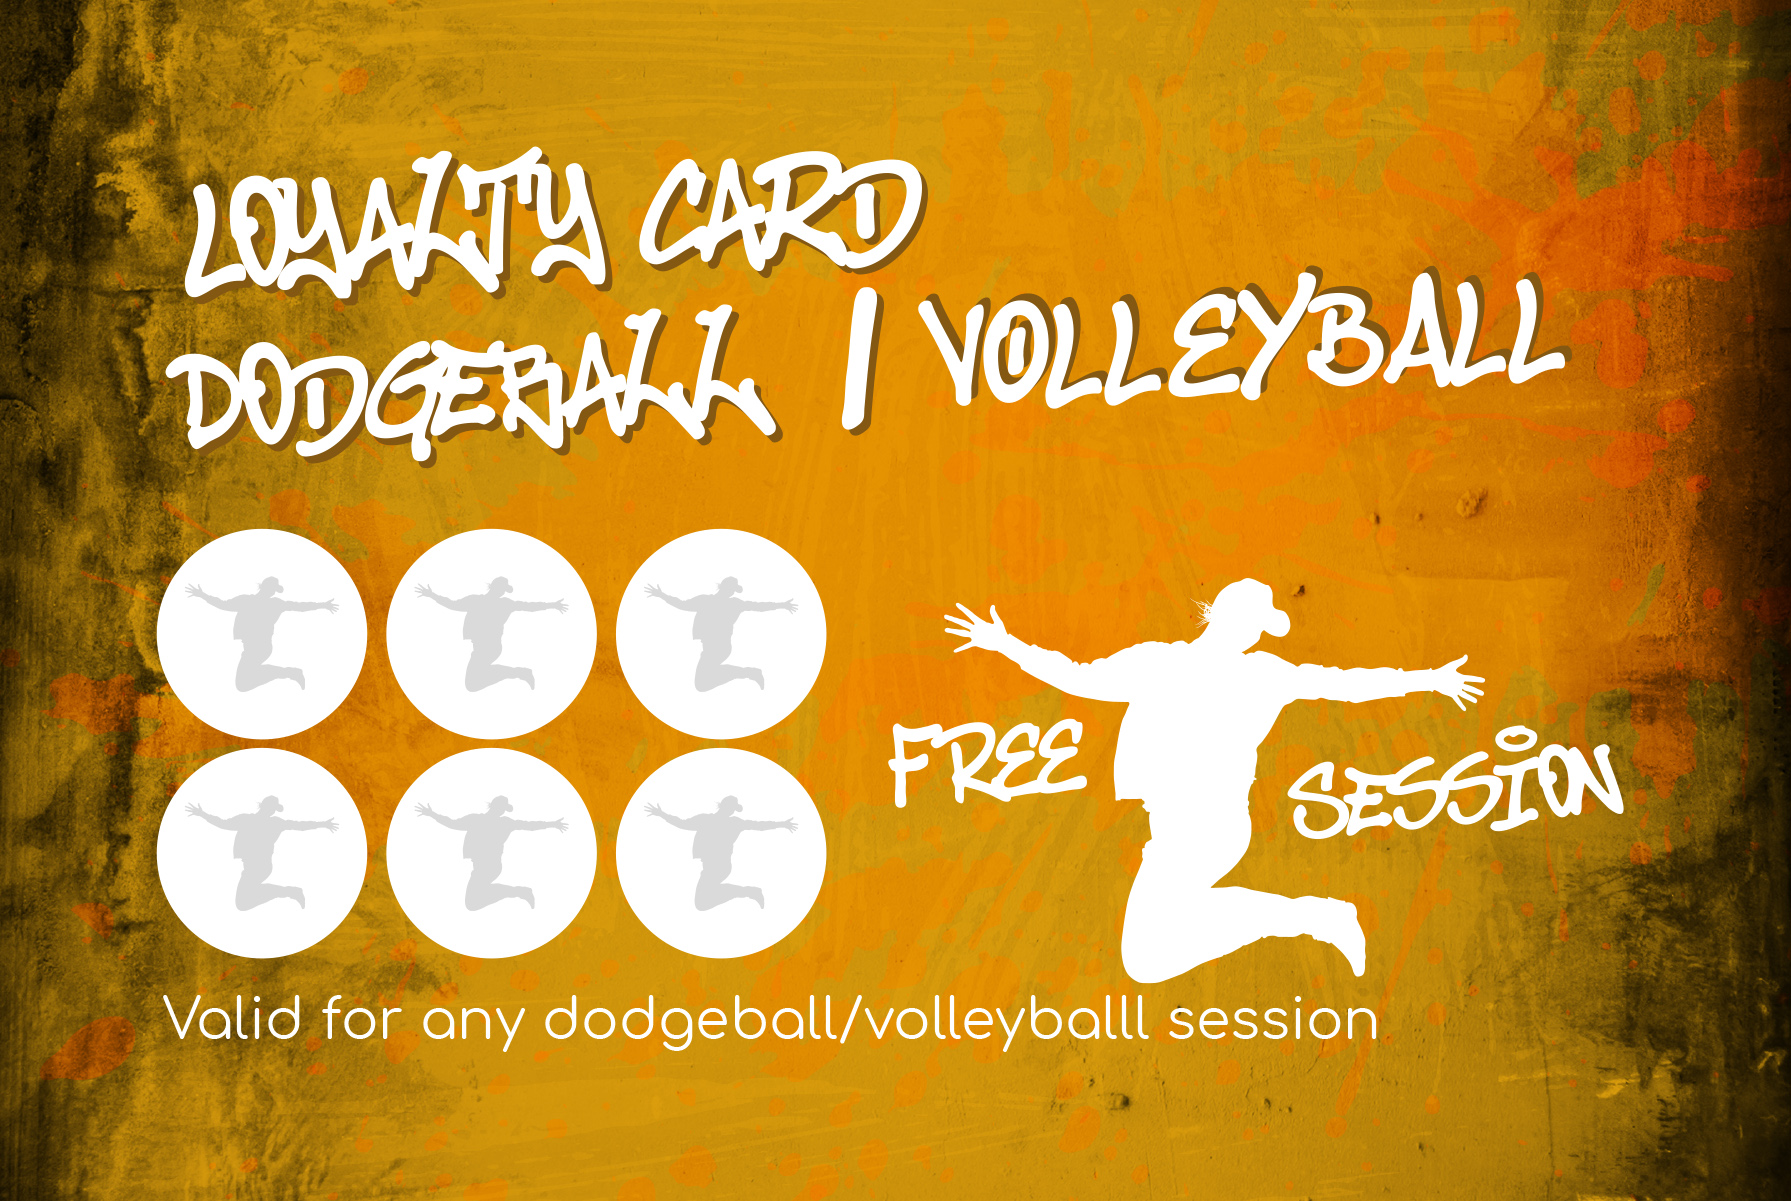 picture of the dodgeball/volleyball loyalty card to help combat trampoline park prices